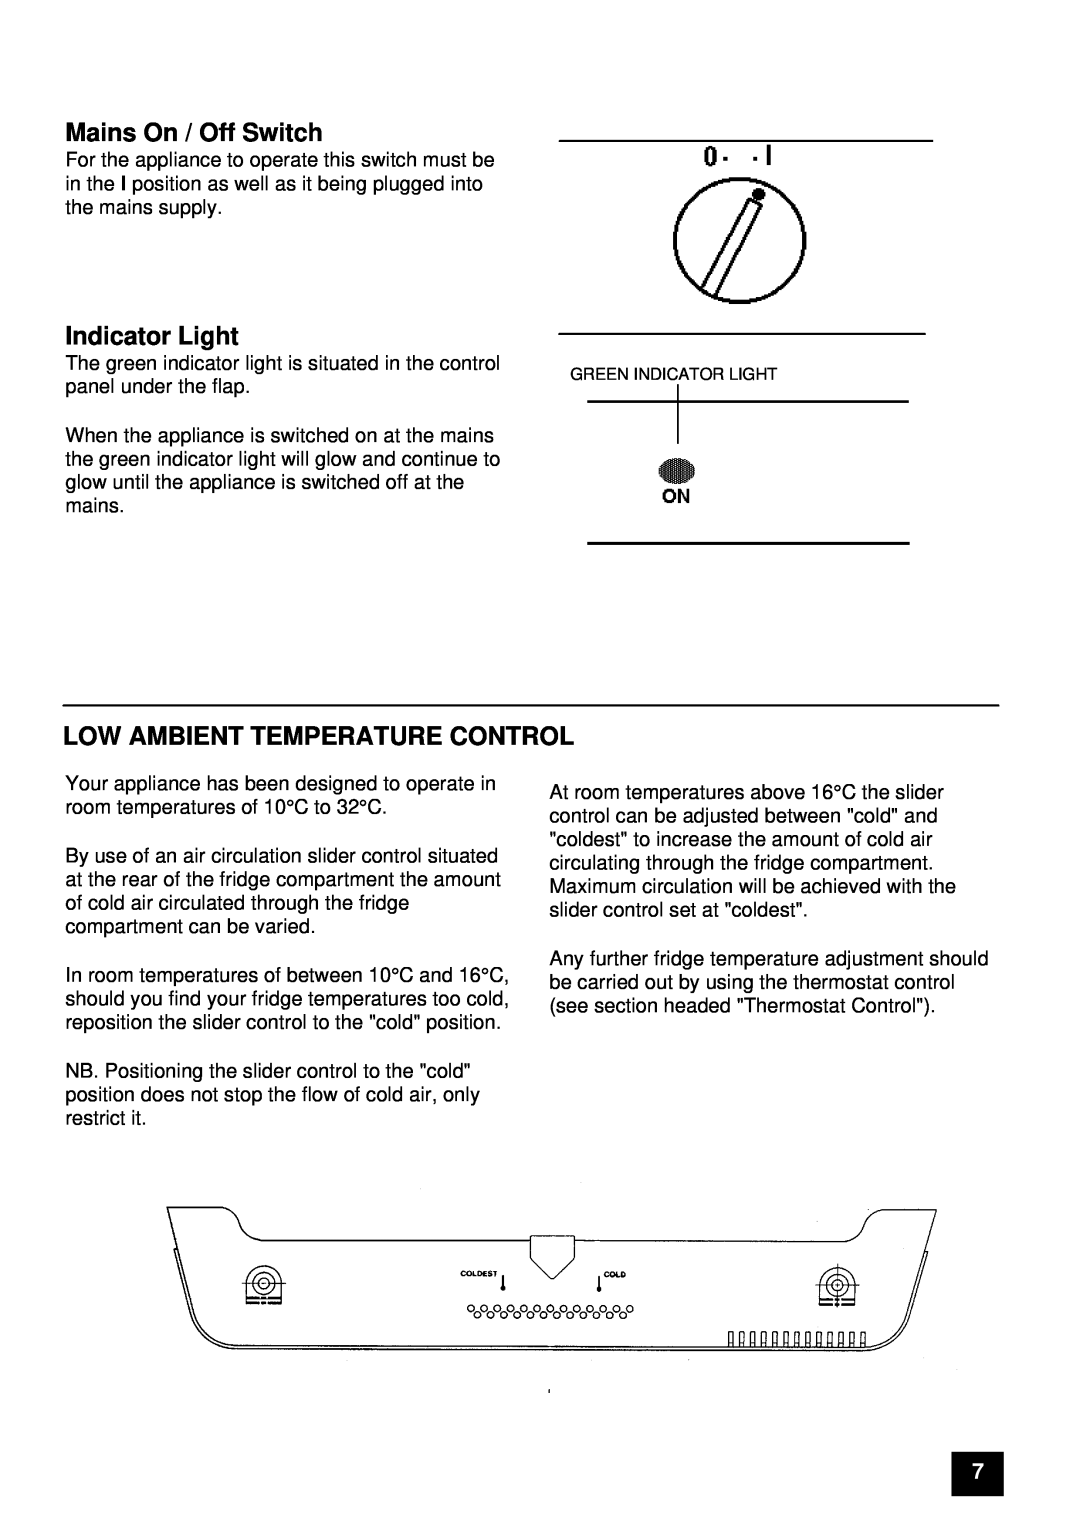 Electrolux ER 7657B, ER 7656B instruction manual Mains On / Off Switch, Indicator Light, Low Ambient Temperature Control 